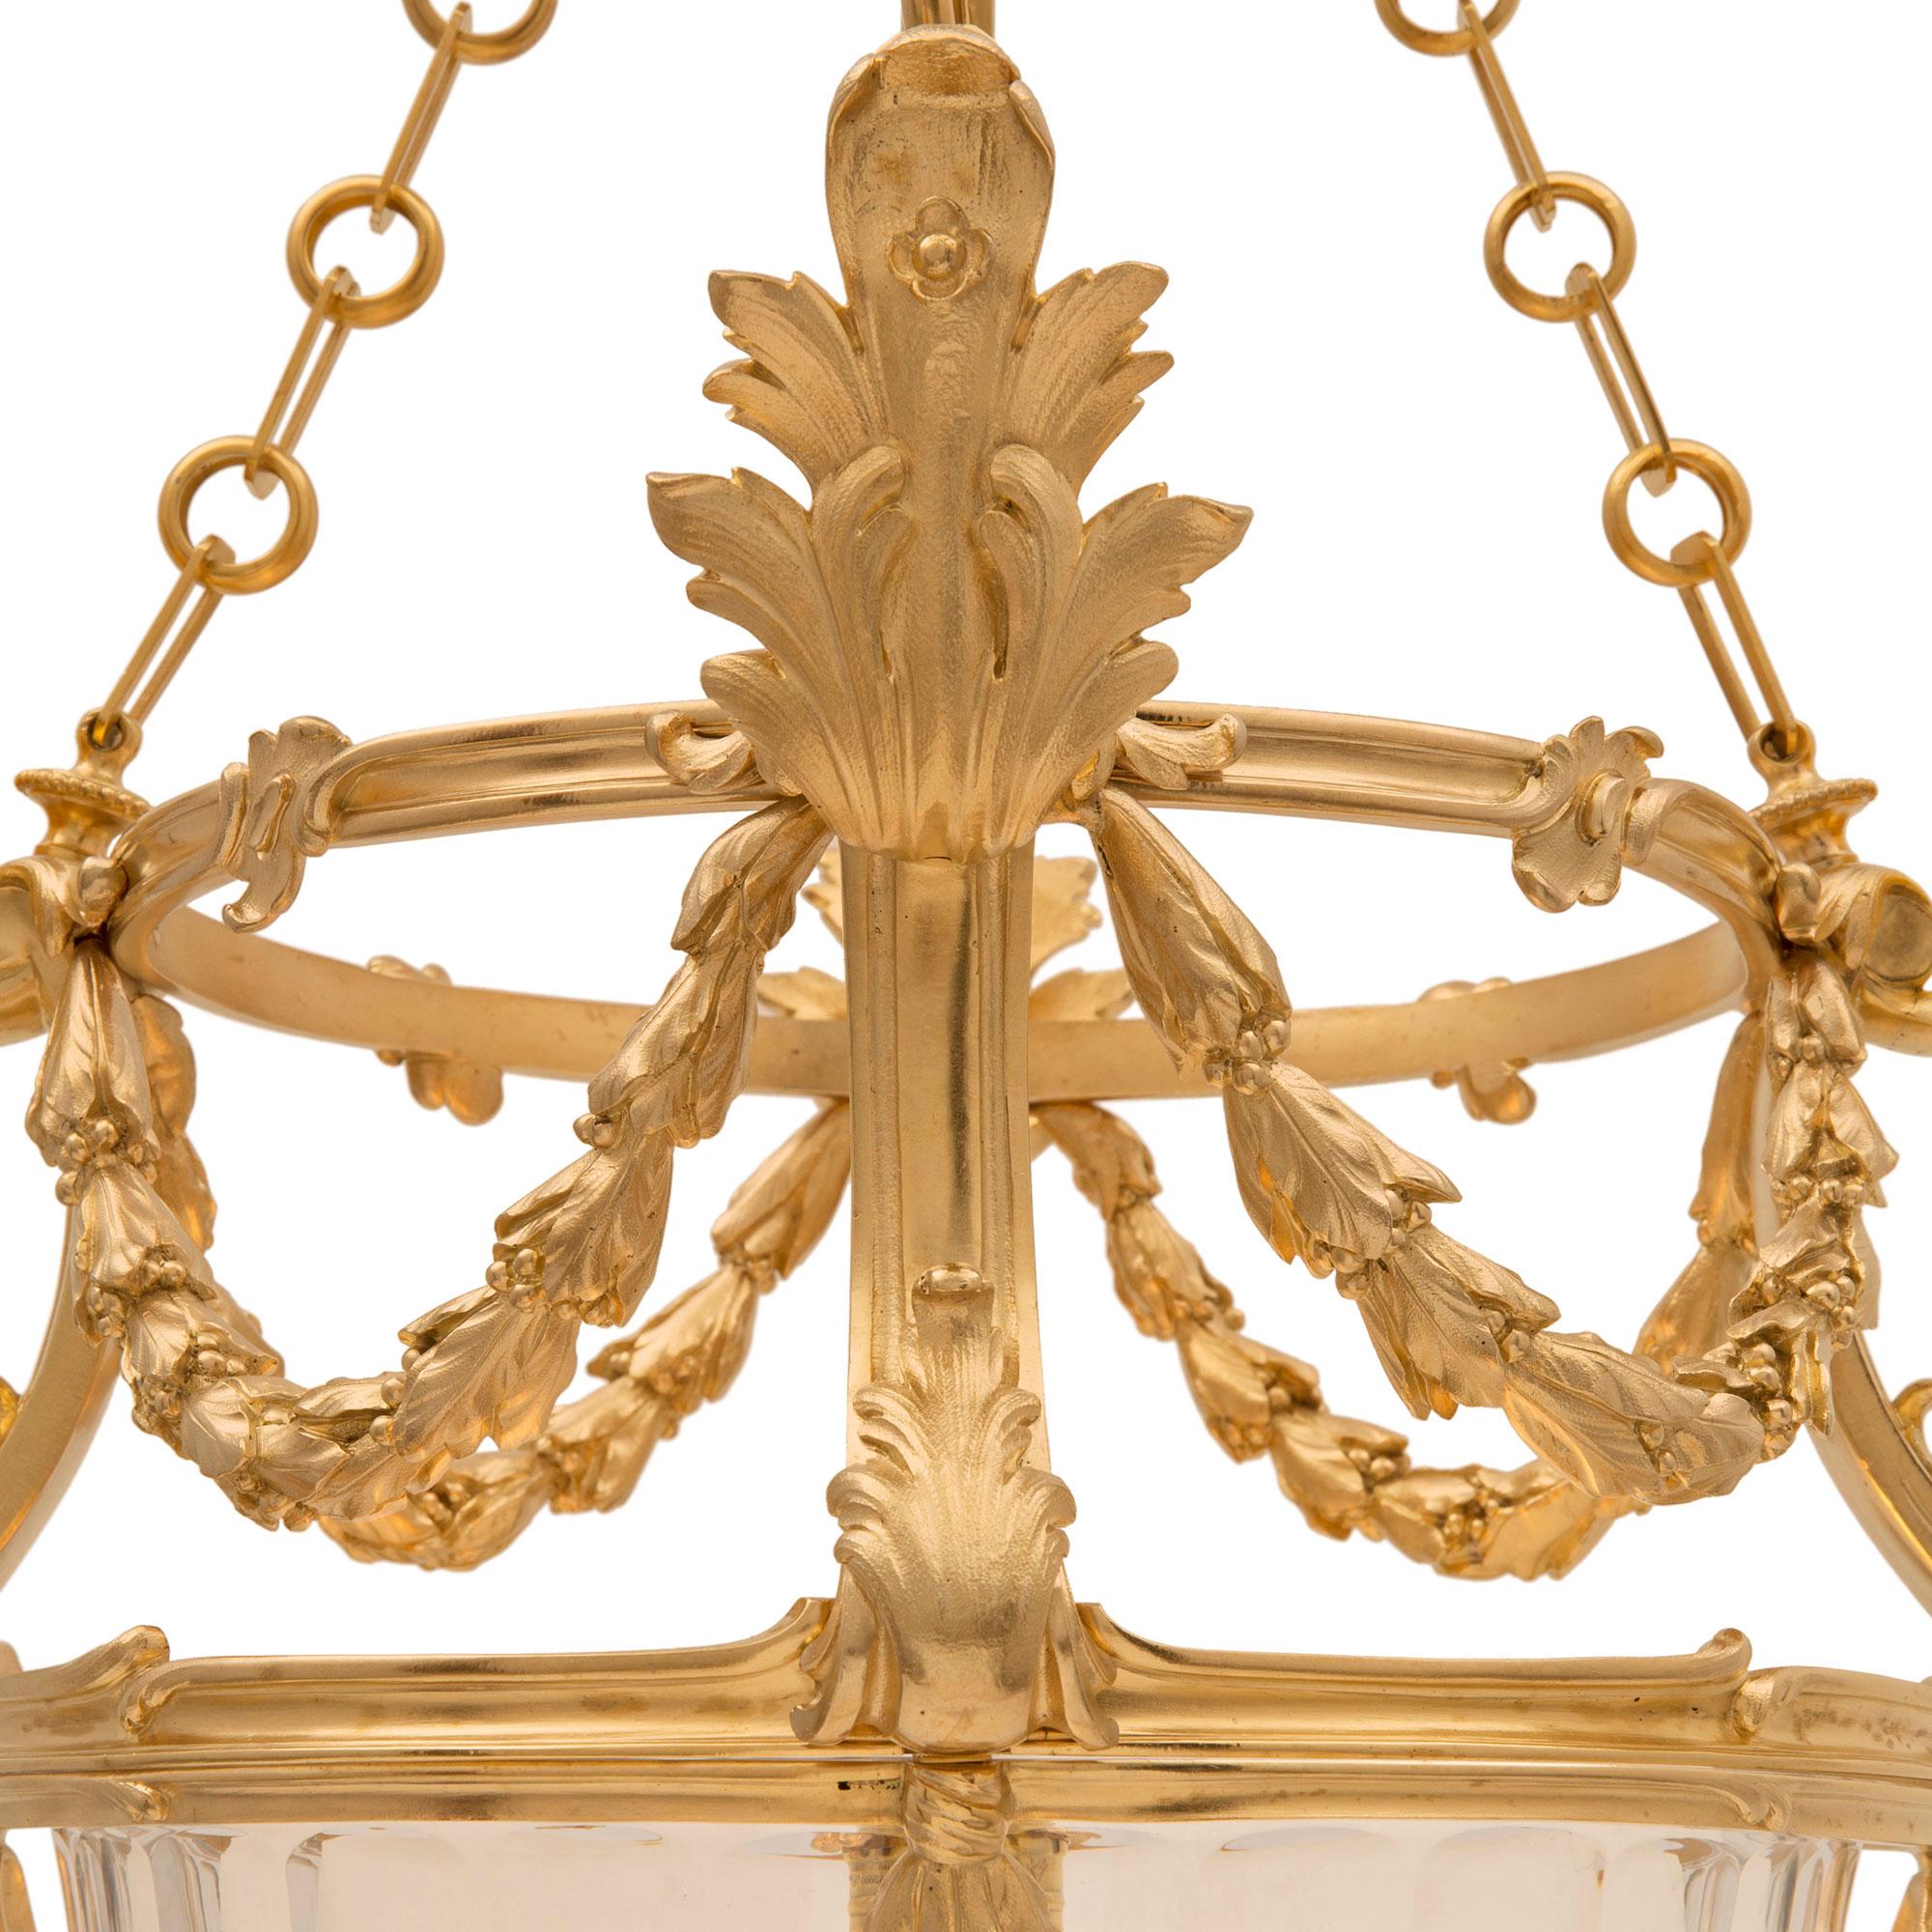 French 19th Century Louis XVI St. Baccarat Crystal and Ormolu Chandelier For Sale 1